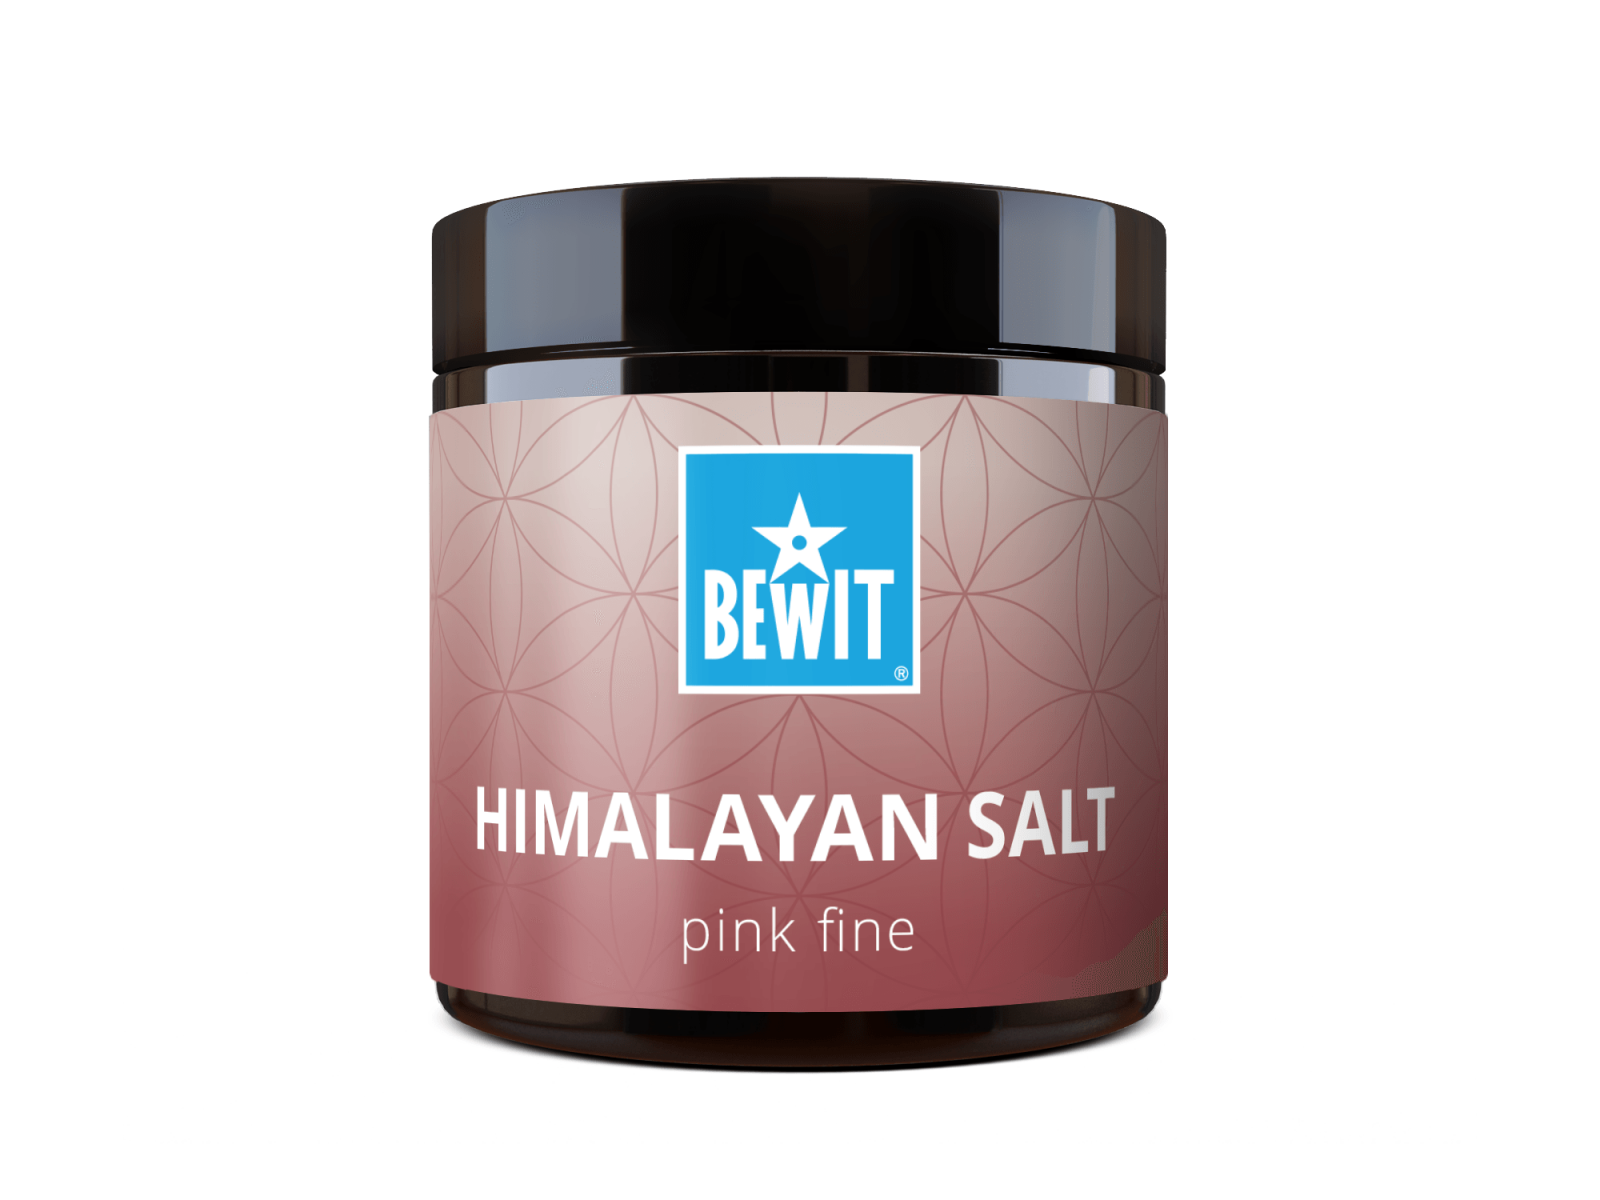 BEWIT Himalayan salt pink, finely ground - A superfood